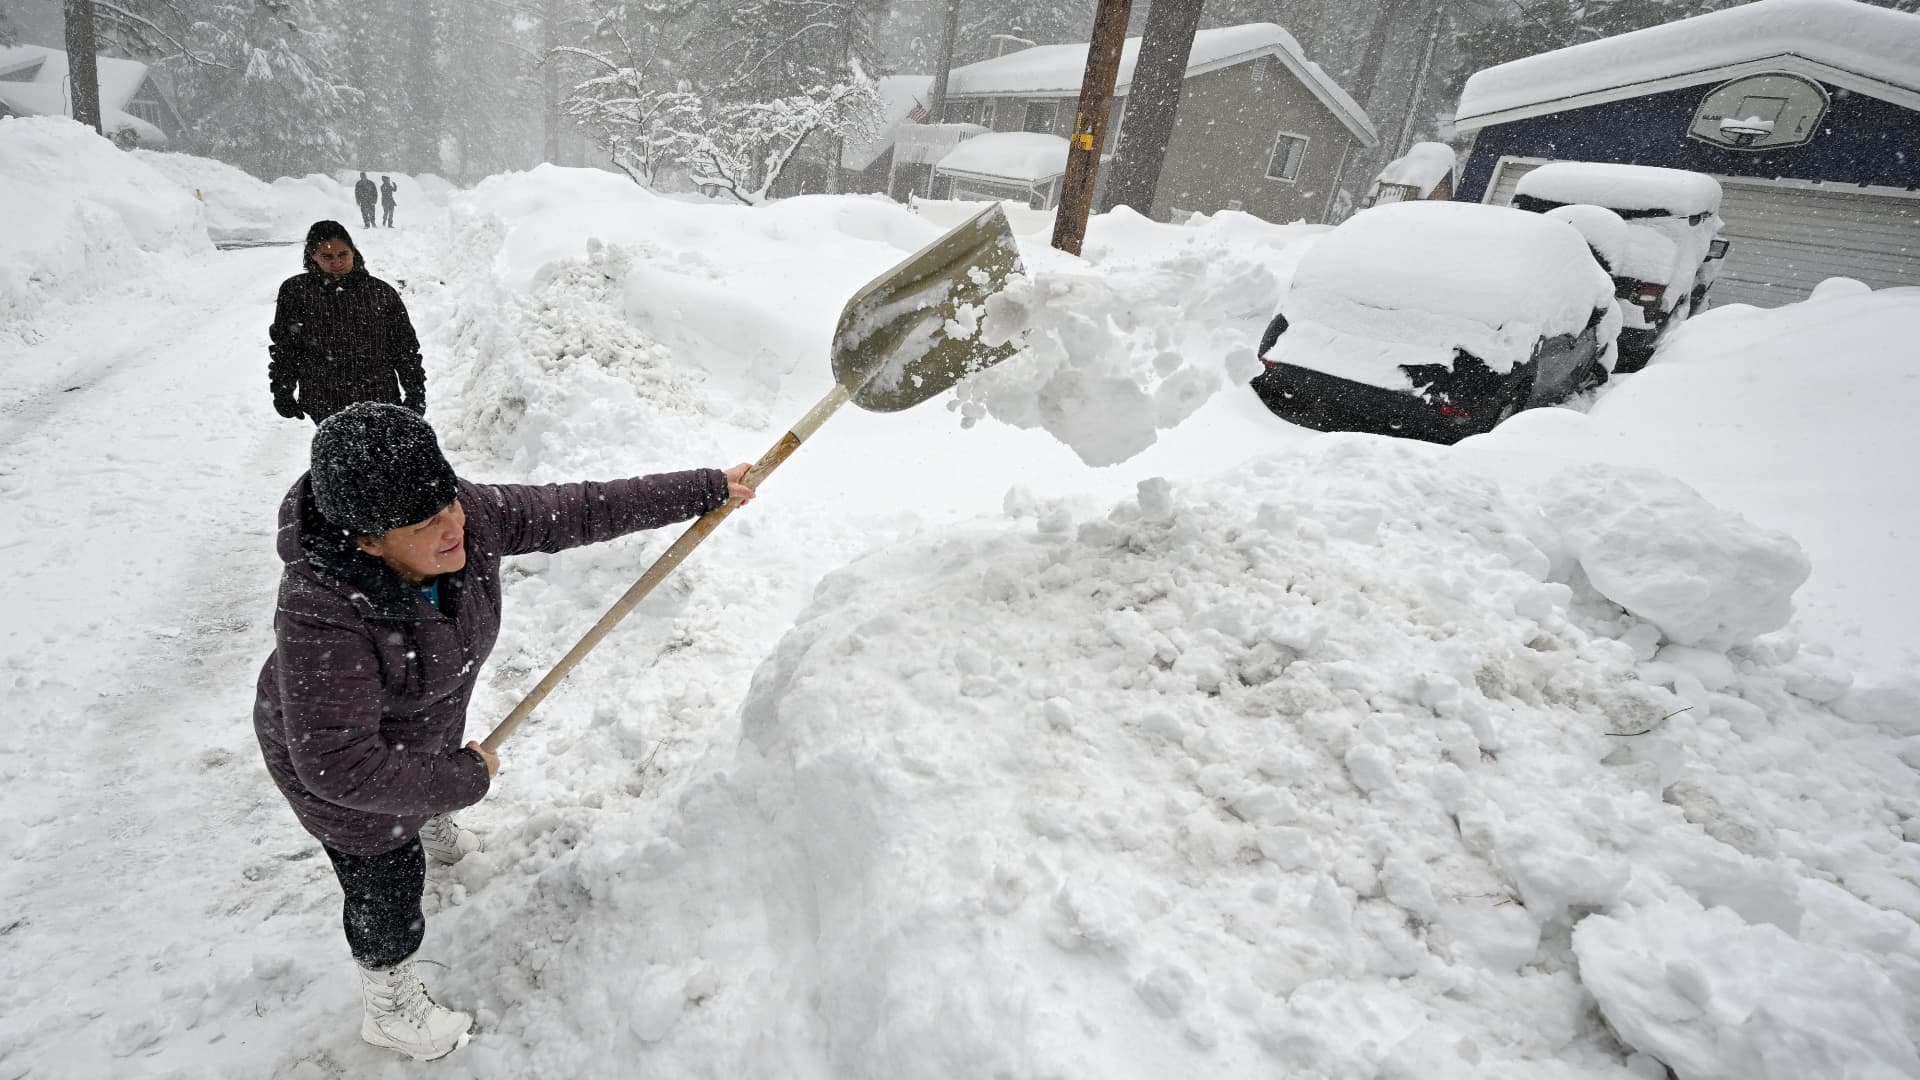 Norma Miro, from La Puente, shovels snow out of the driveway of the rental property she shared with her family for the last week in Wrightwood so they can move their vehicles on Wednesday, Mar. 1, 2023.